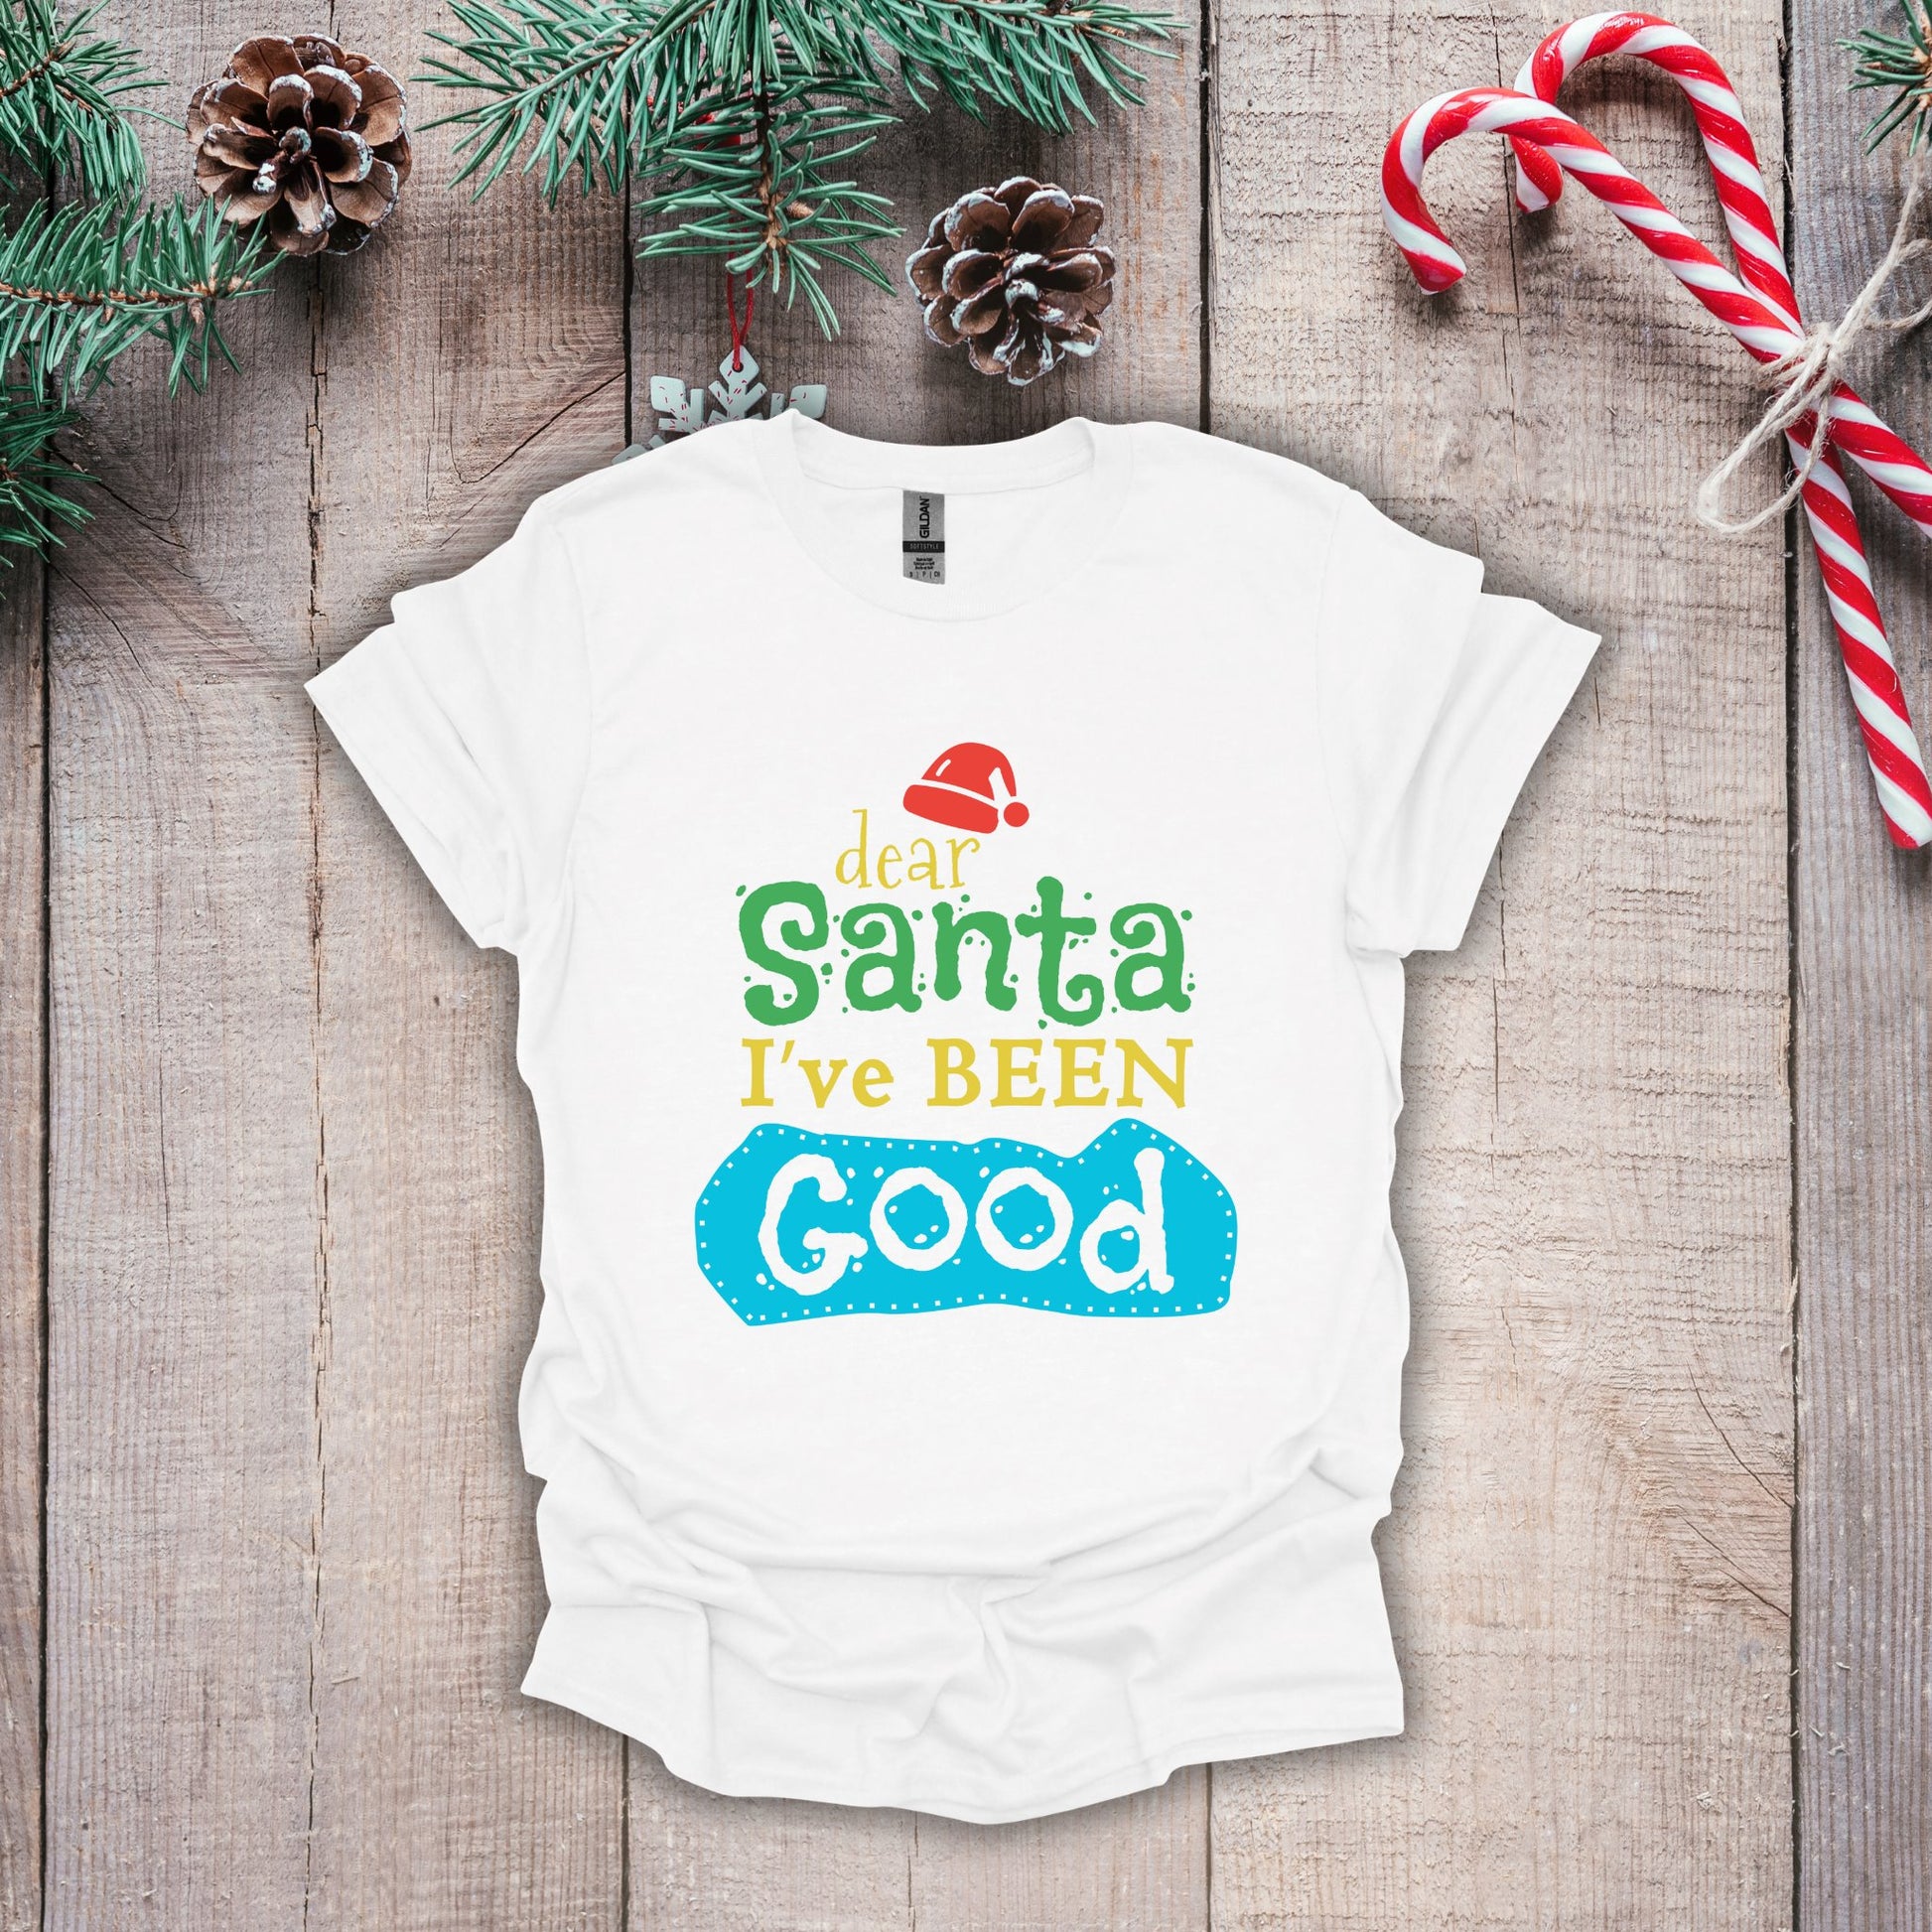 Christmas T-Shirt - Dear Santa I've Been Good - Cute Christmas Shirts - Youth and Adult Christmas TShirts T-Shirts Graphic Avenue White Adult Small 